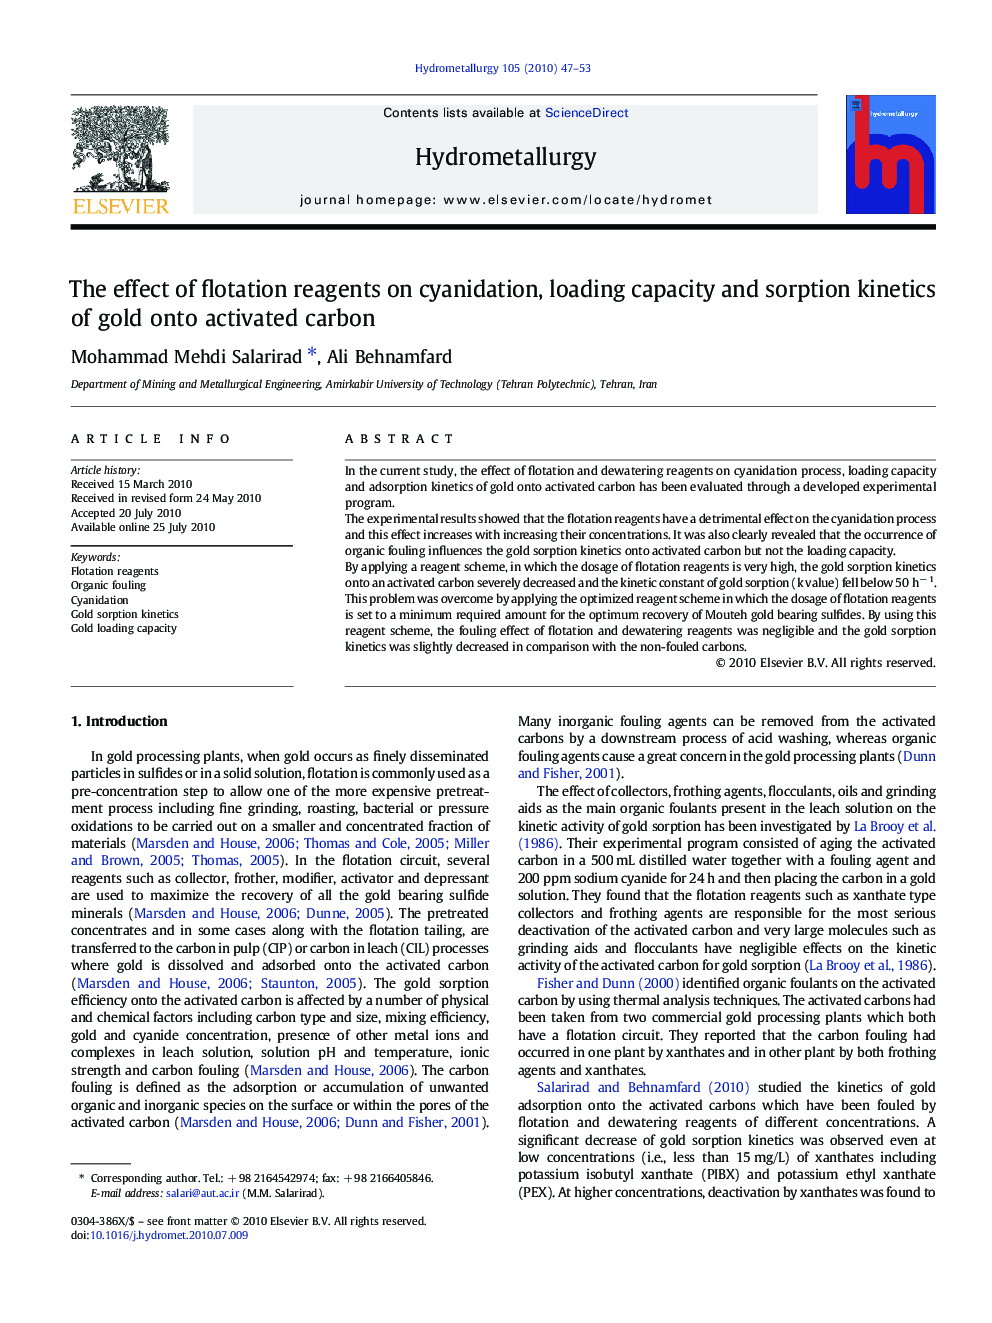 The effect of flotation reagents on cyanidation, loading capacity and sorption kinetics of gold onto activated carbon